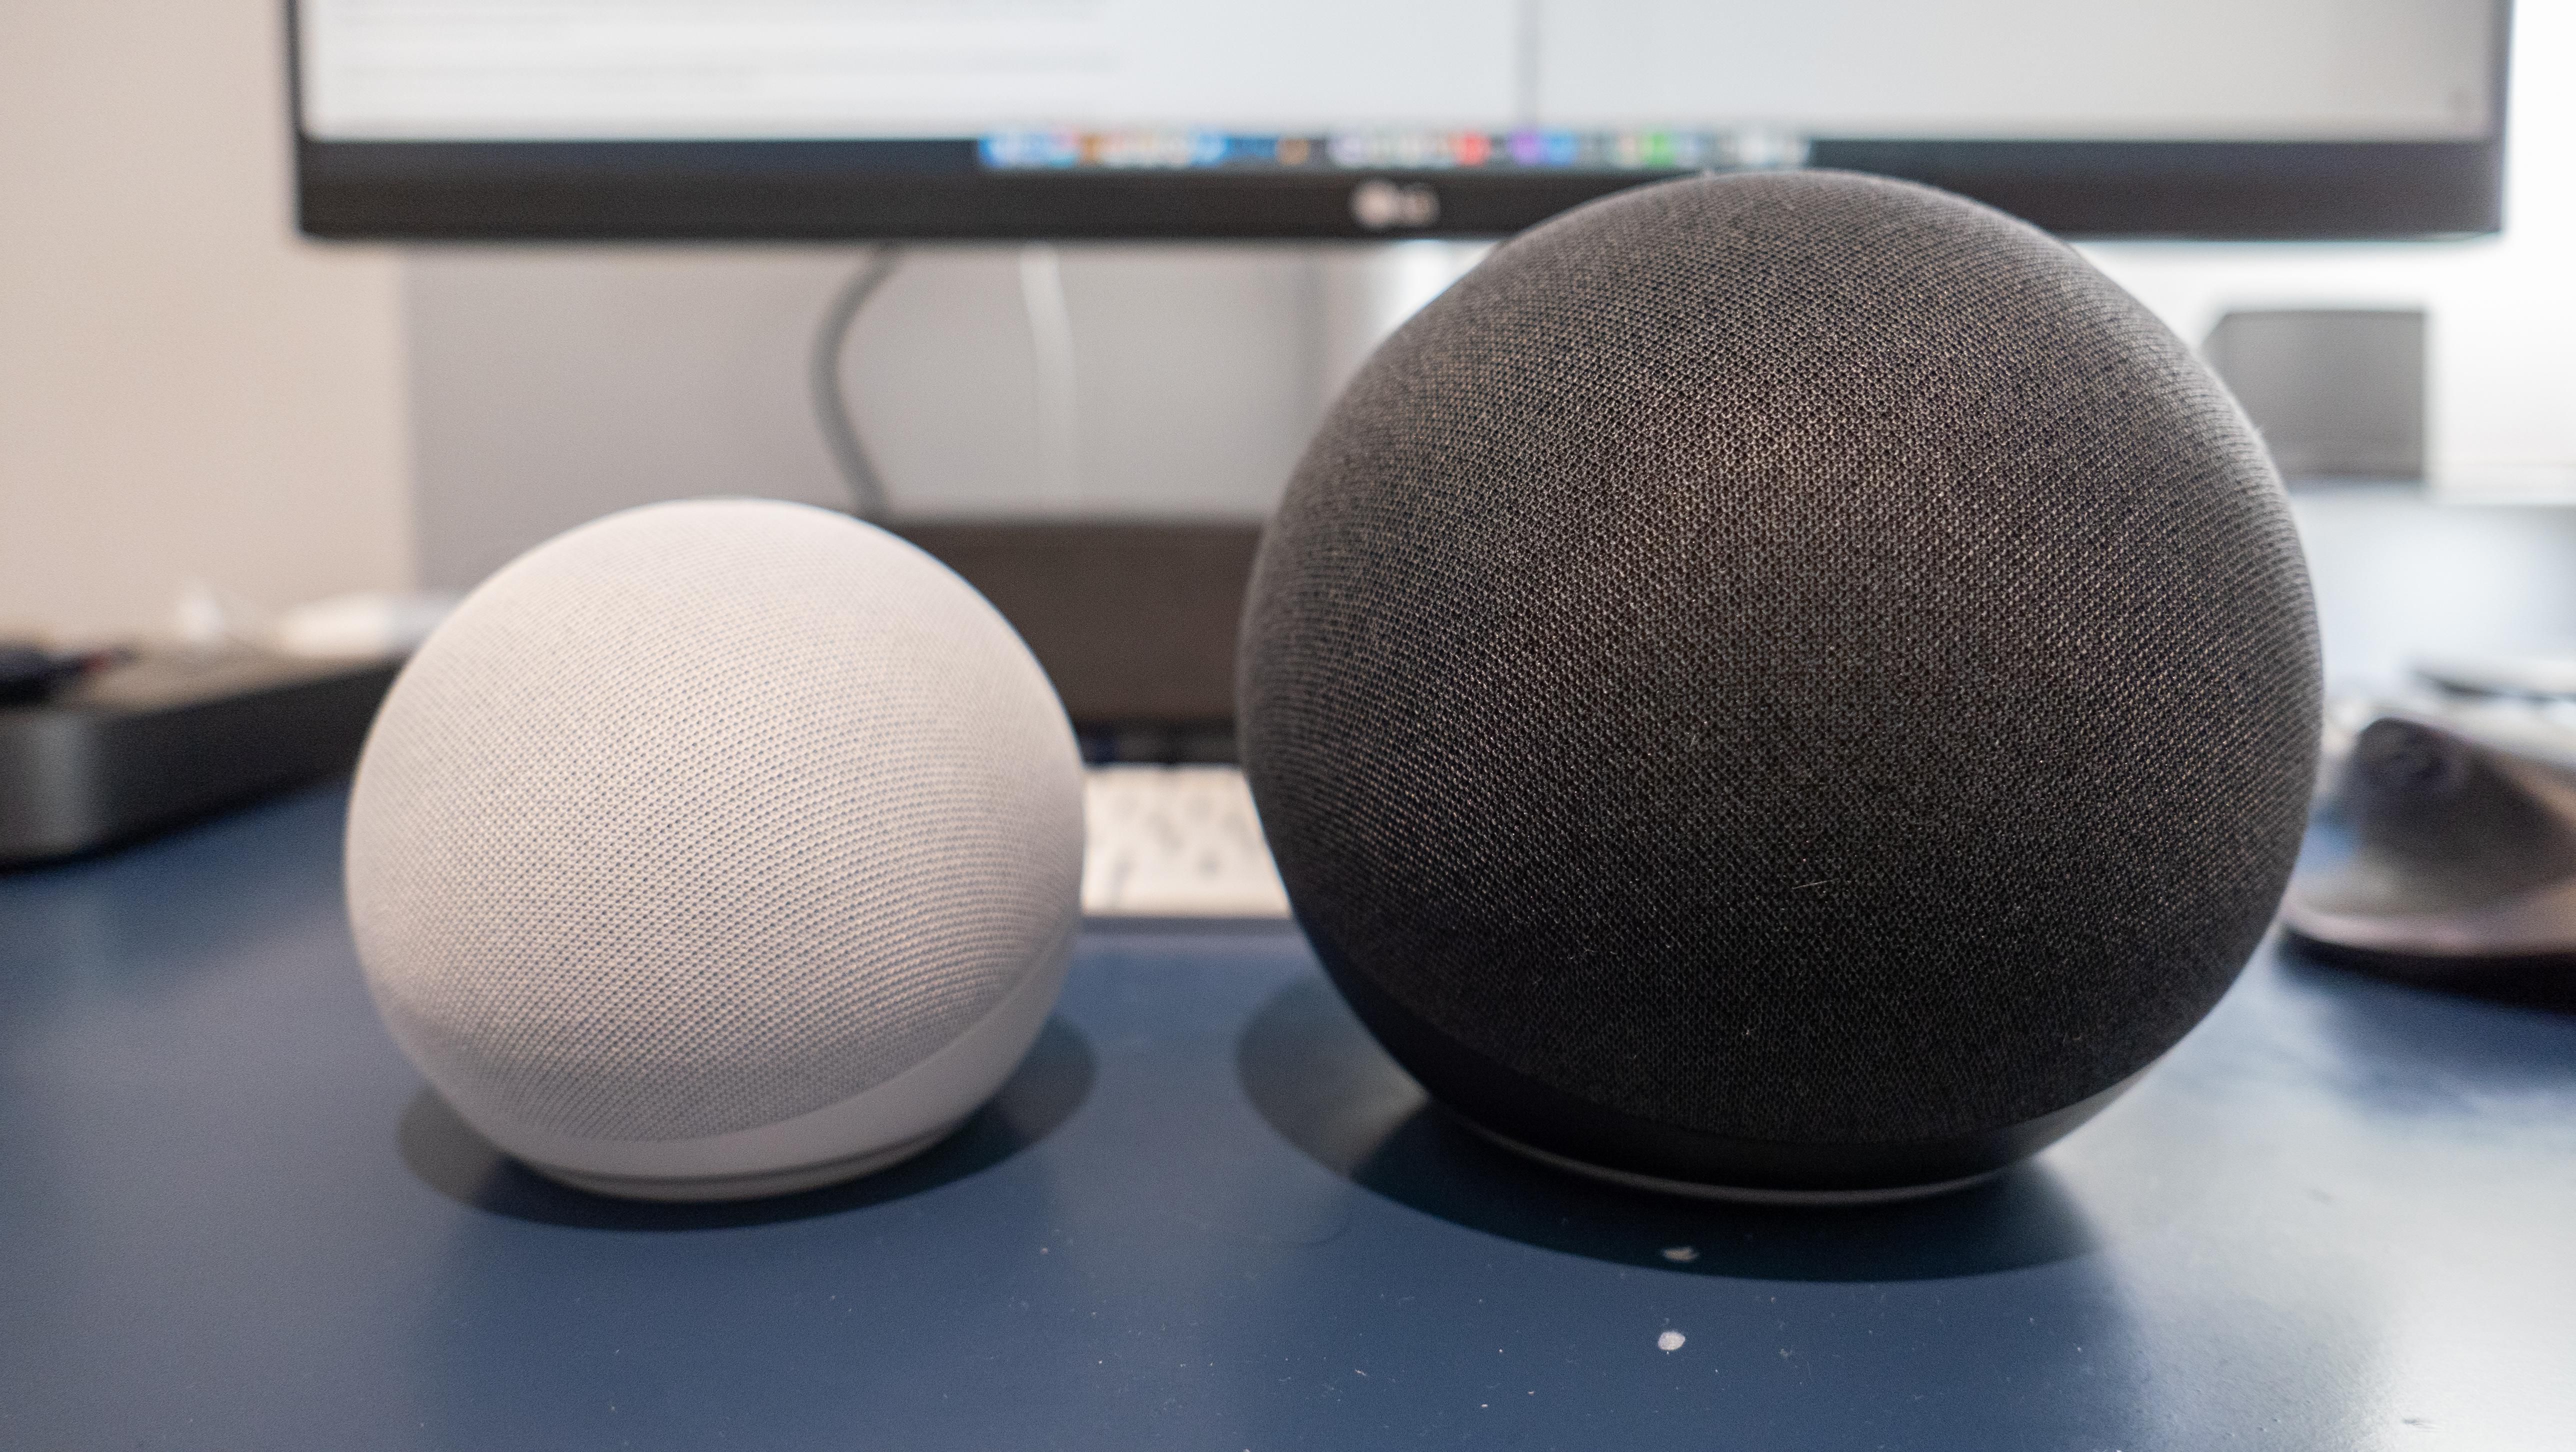 The Amazon Echo Dot (left) and Echo (right)​